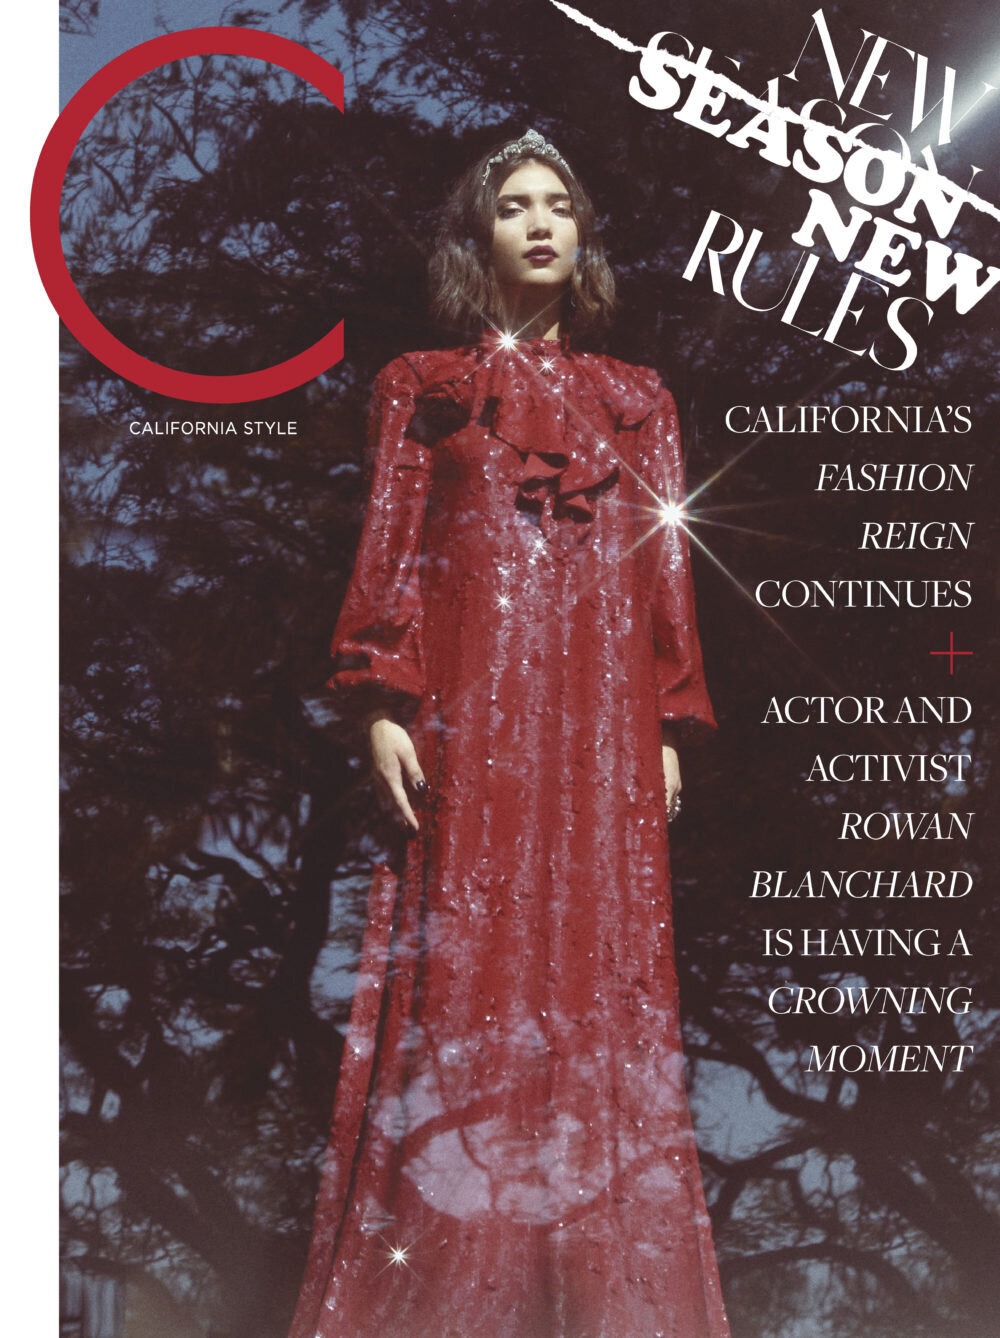 Rowan Blanchard  on the cover of C Magazine in a red dress